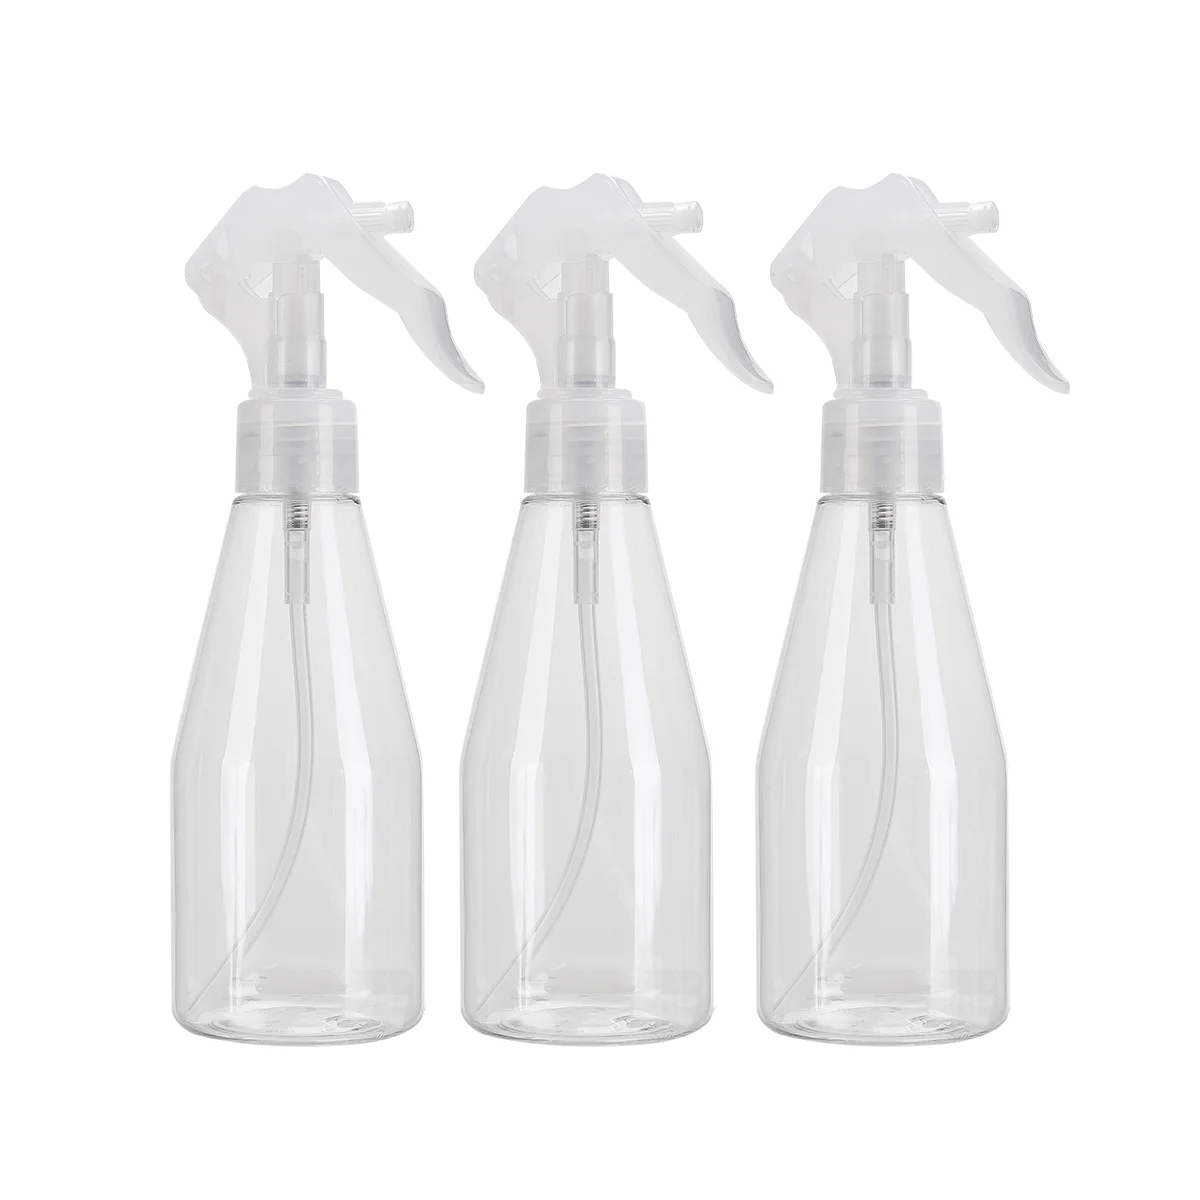 3 Pcs Spray Bottles For Hair Plastic 200ml Bottles Safe Odorless Sprayer Leak-proof Great for Cleaning Products Garden Beauty new autumn winter cold proof warm scarf imitation cashmere hat neck cover cotton headbands hair accessories for women girls